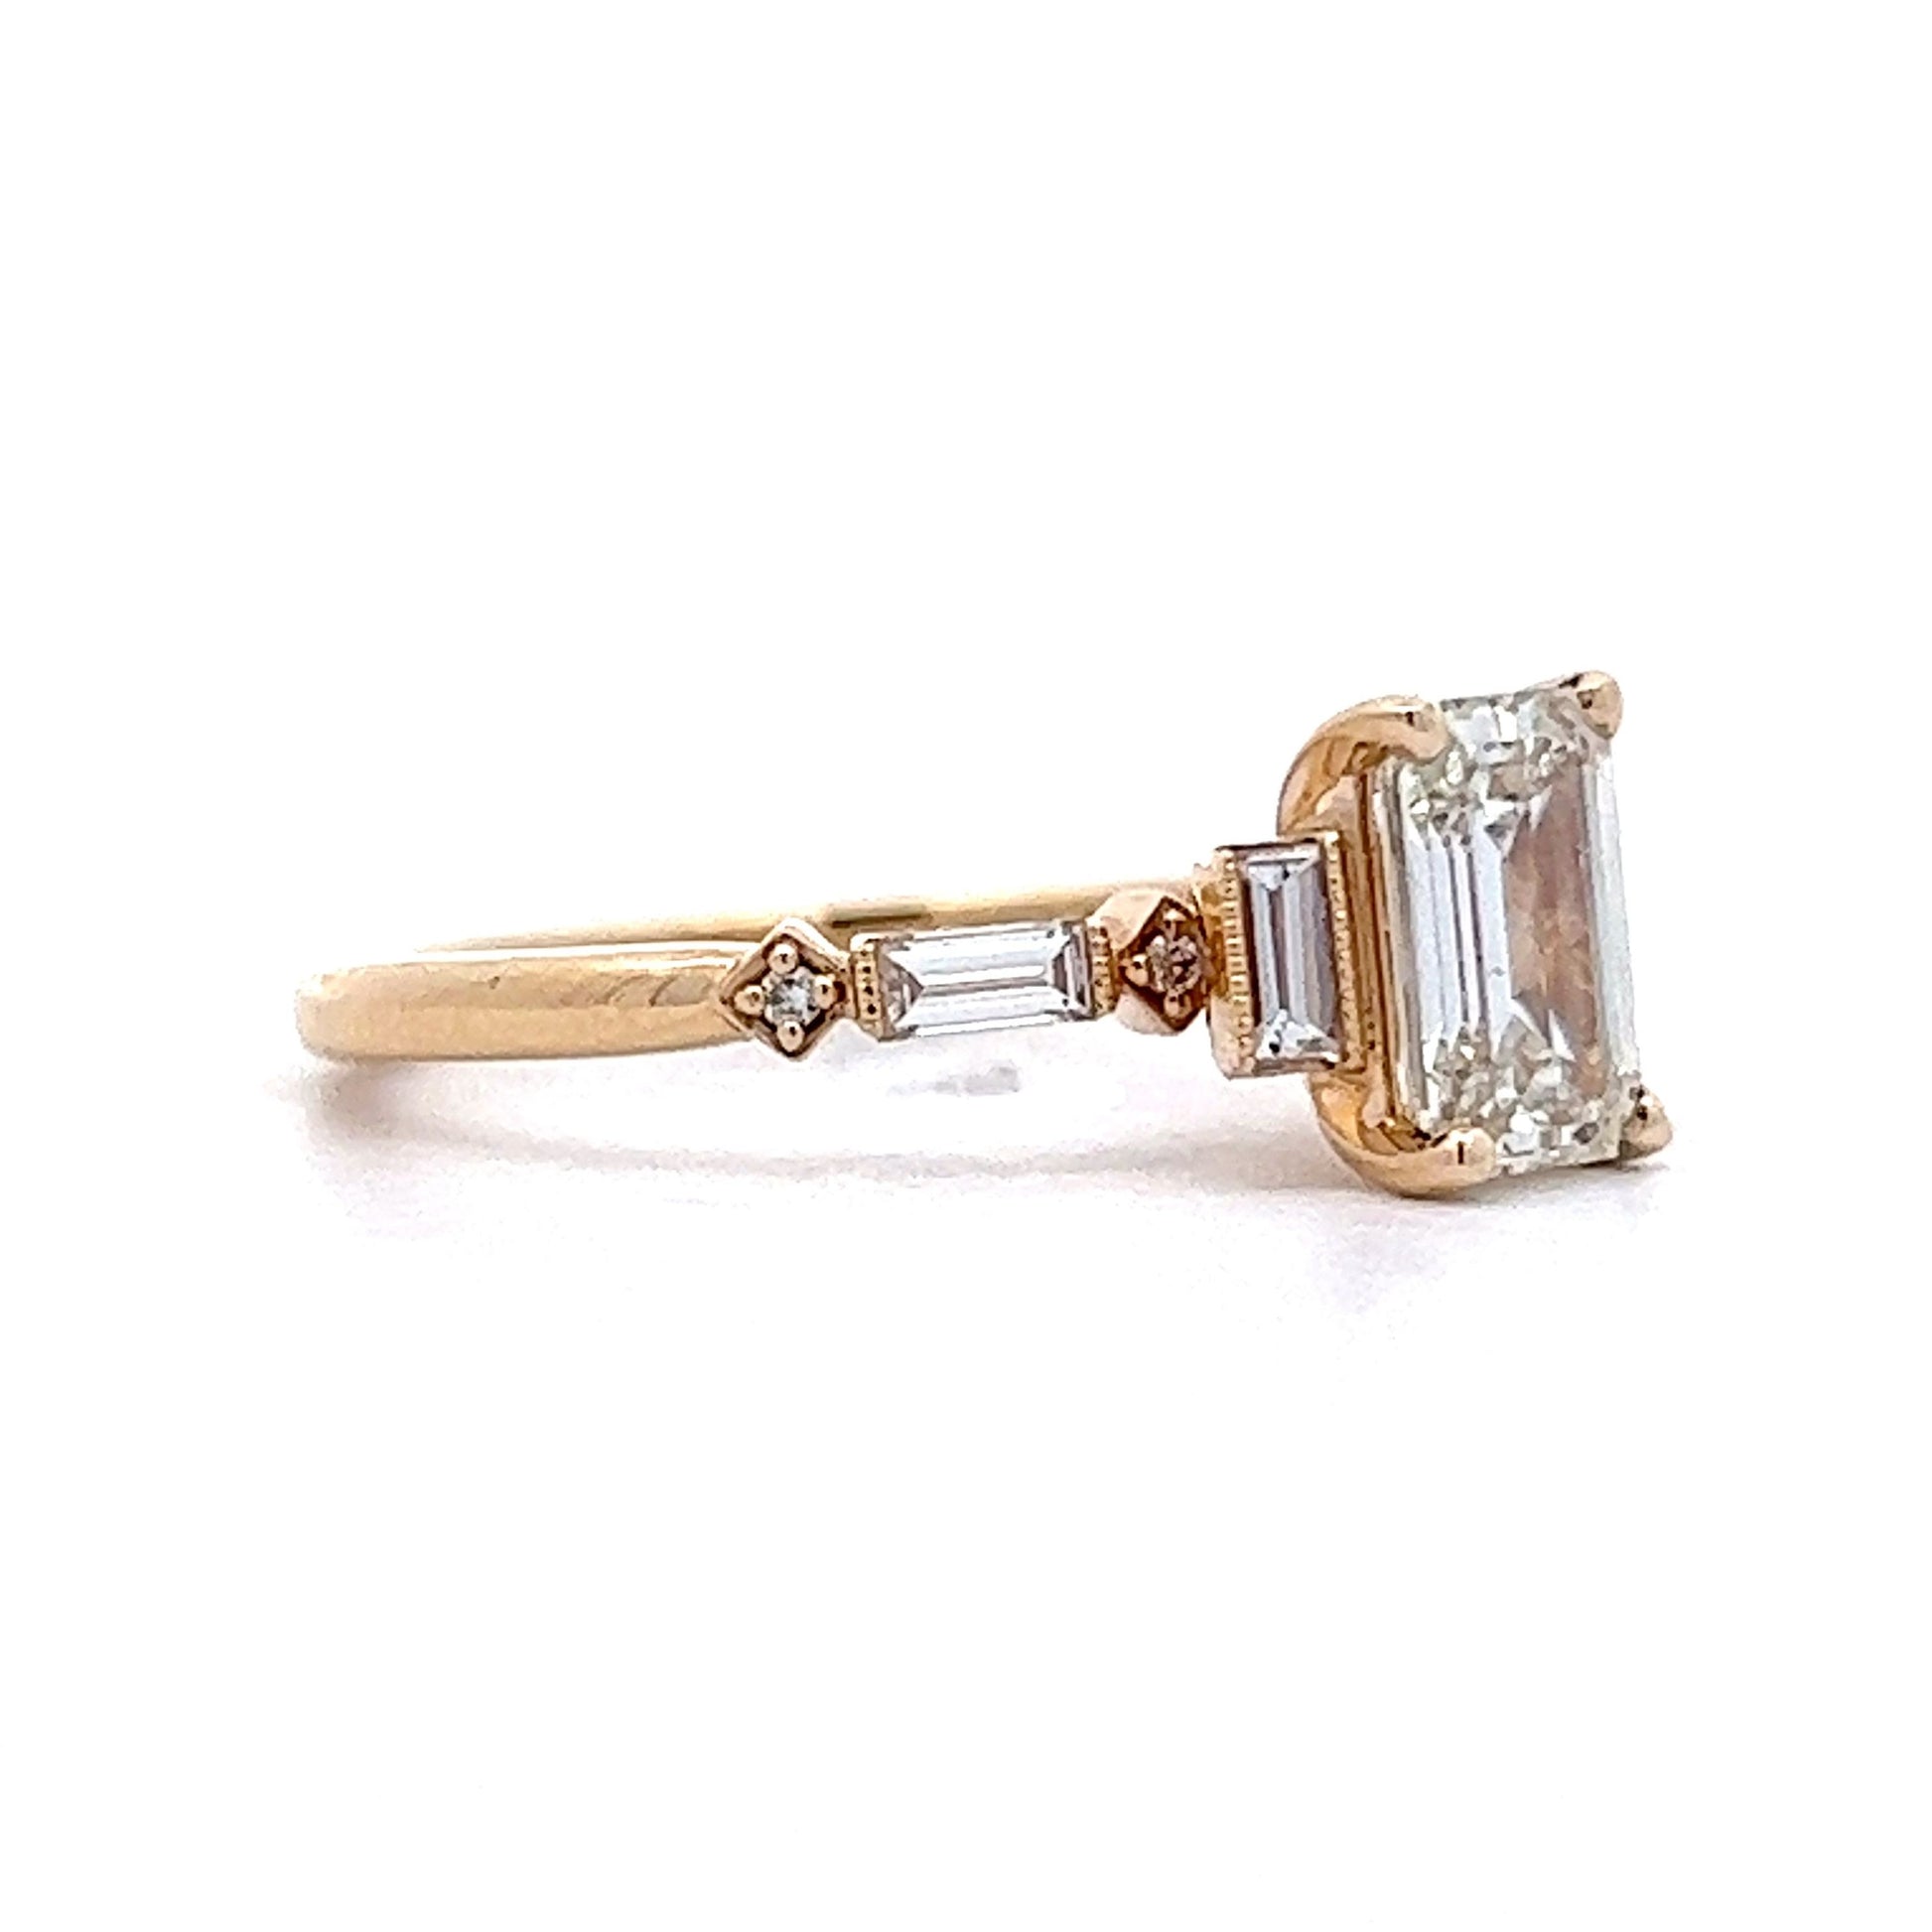 1.09 Emerald Cut Three Stone Engagement Ring in 14k Yellow Gold